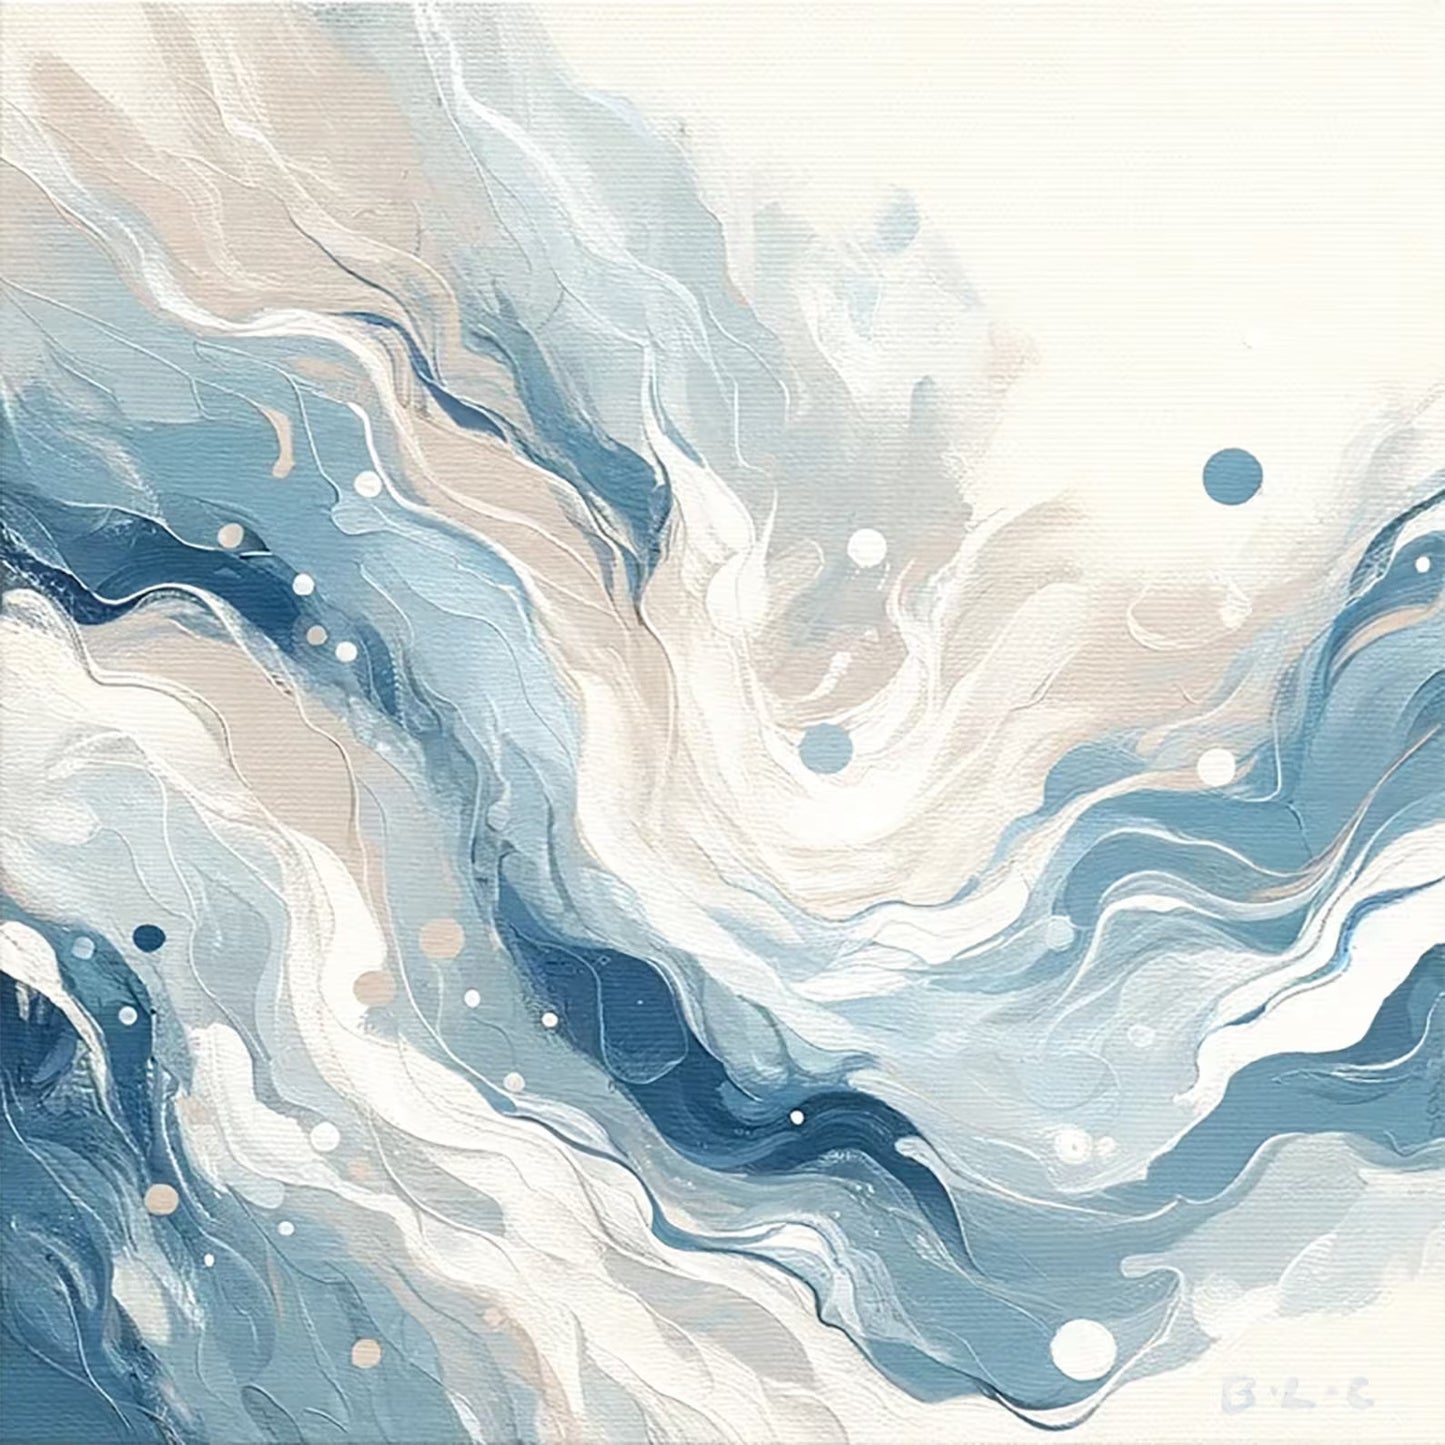 Serene Swirls - Original Hand-Painted Painting - Abstract Ocean Waves - Calming Blue and Cream Wall Art - Contemporary Home Décor